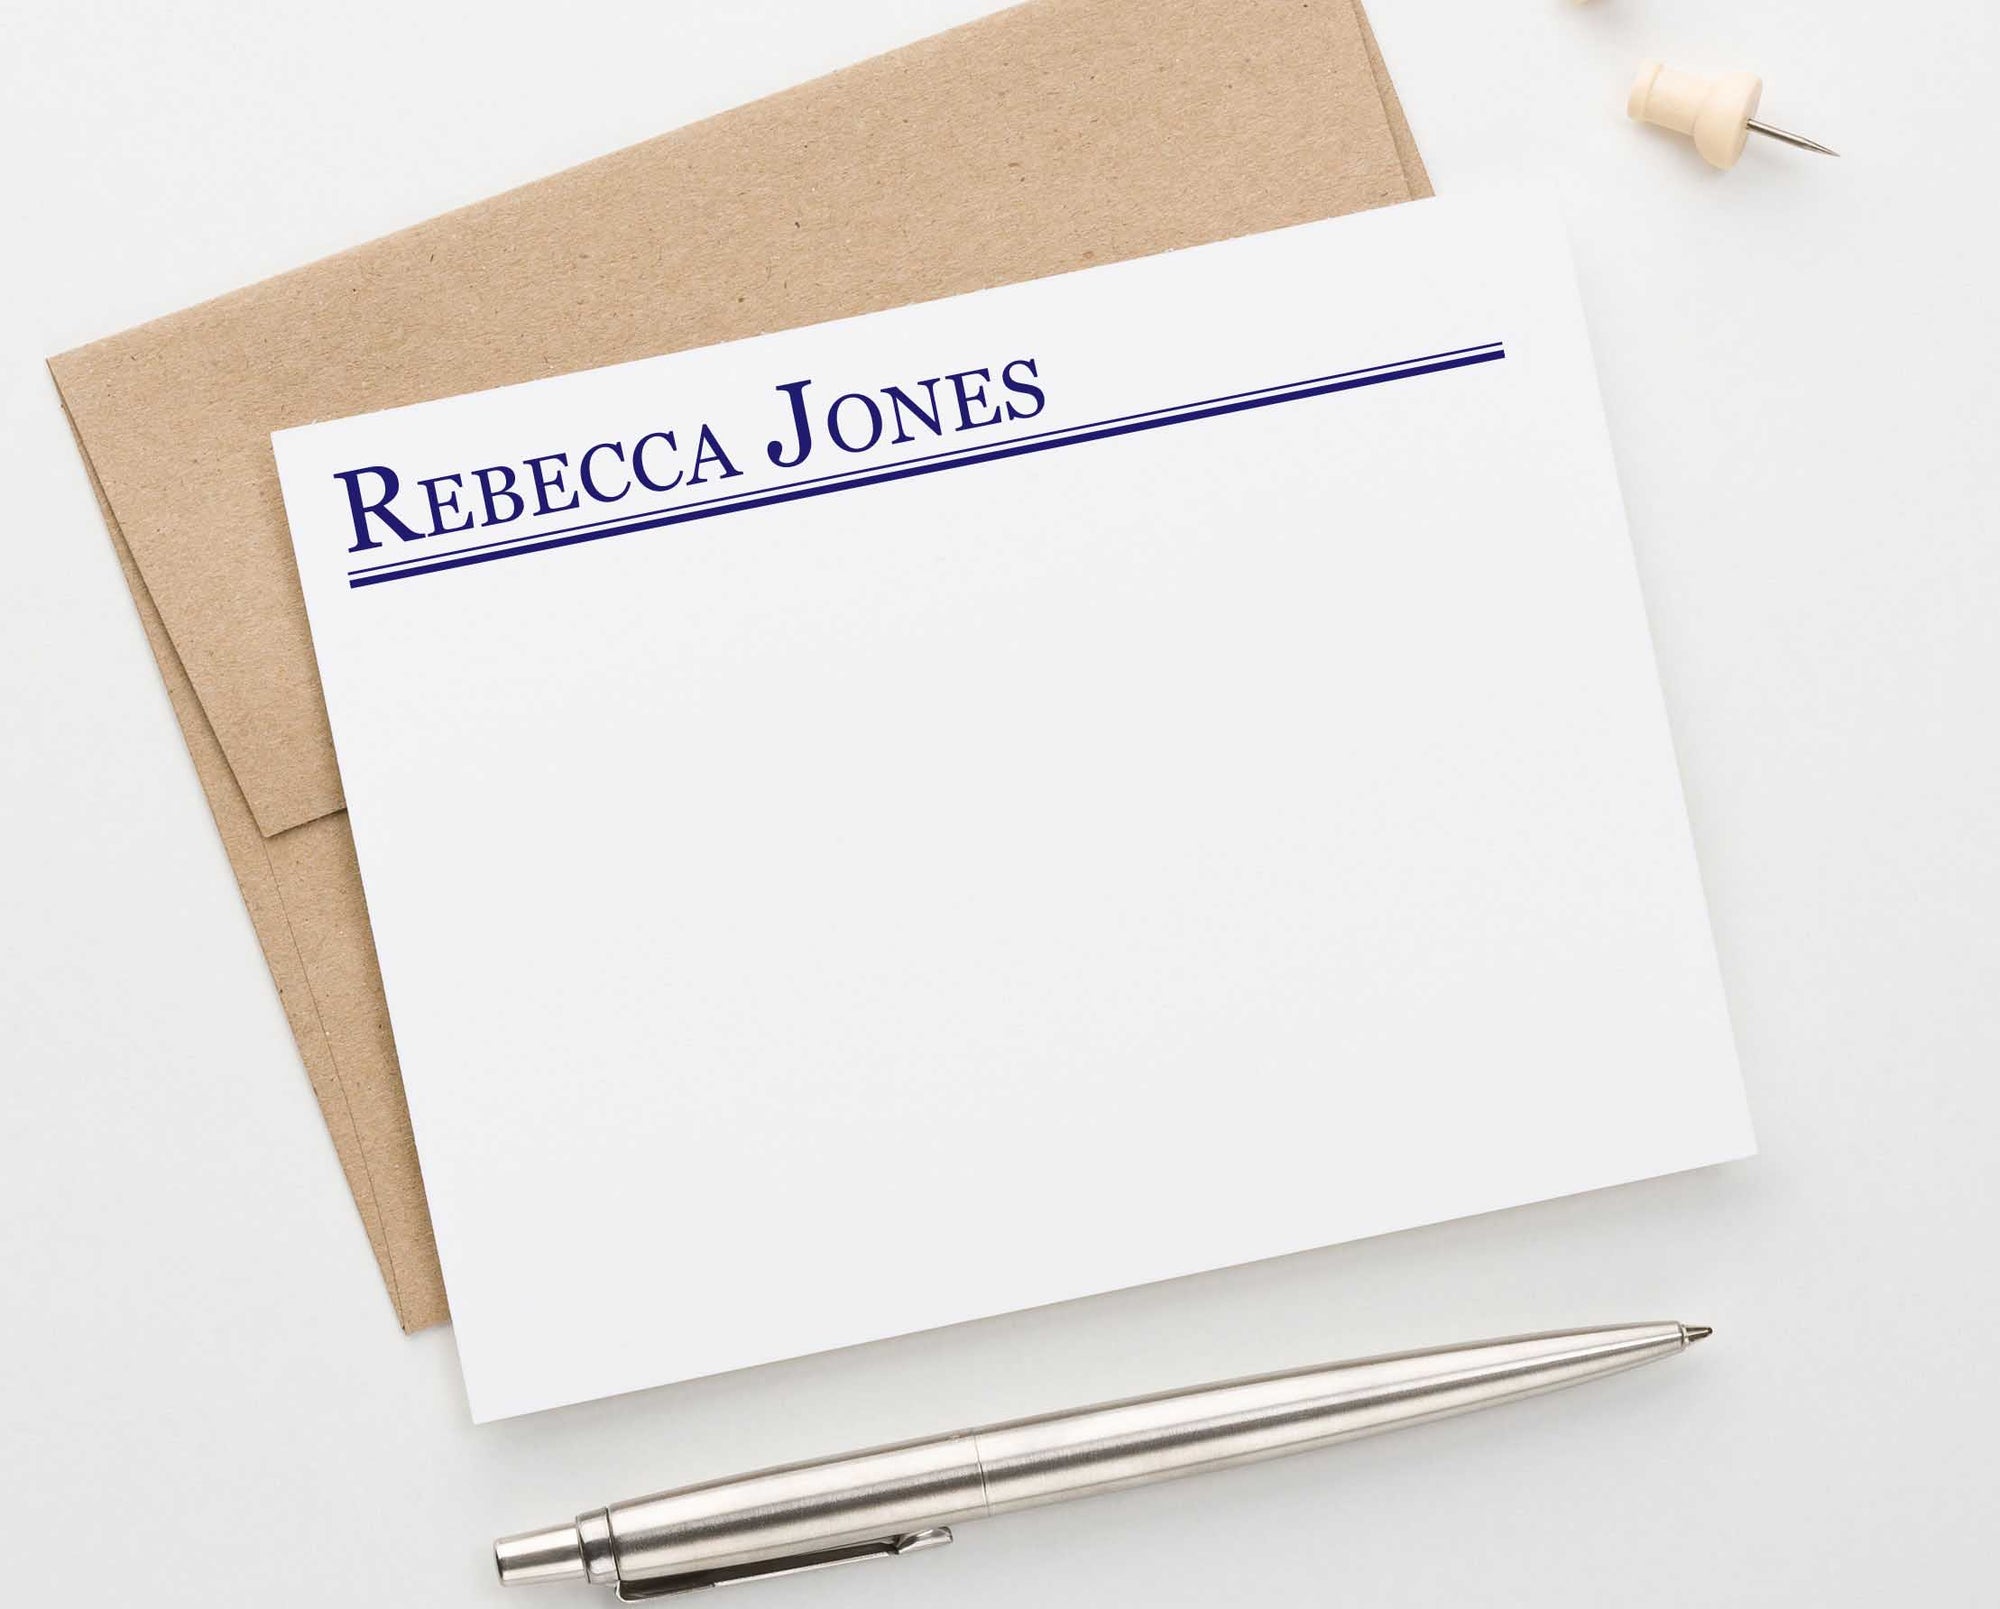 Personalized Stationery Set for Women Men or Family Note 